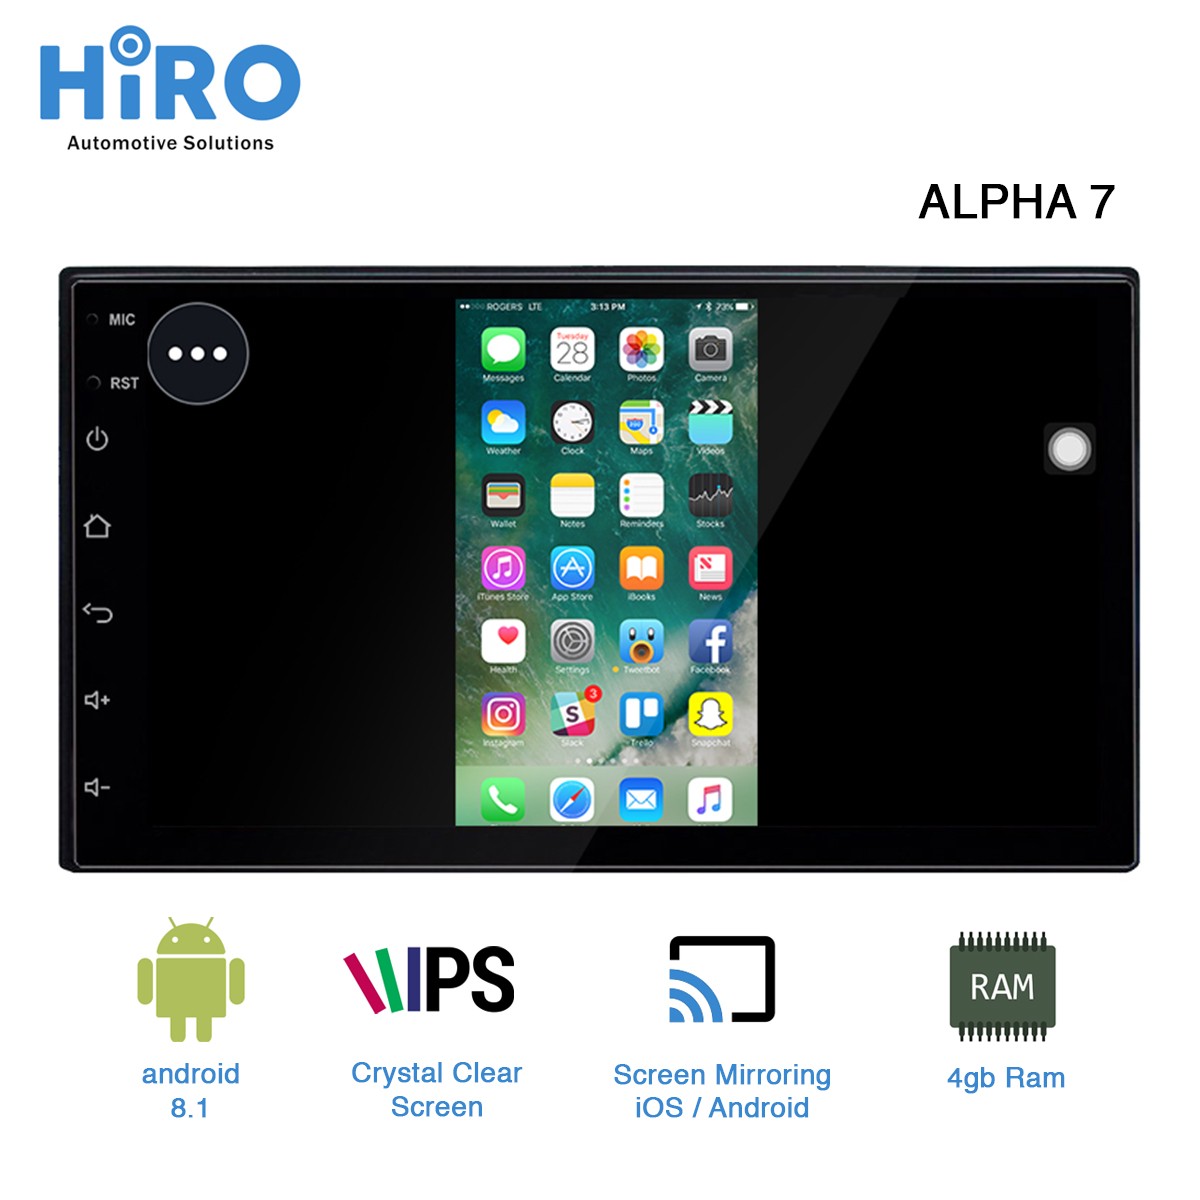 HIRODIO ALPHA 7 INCH - ANDROID MIRRORING iOS ANDROID - HIGH QUALITY PRODUCT